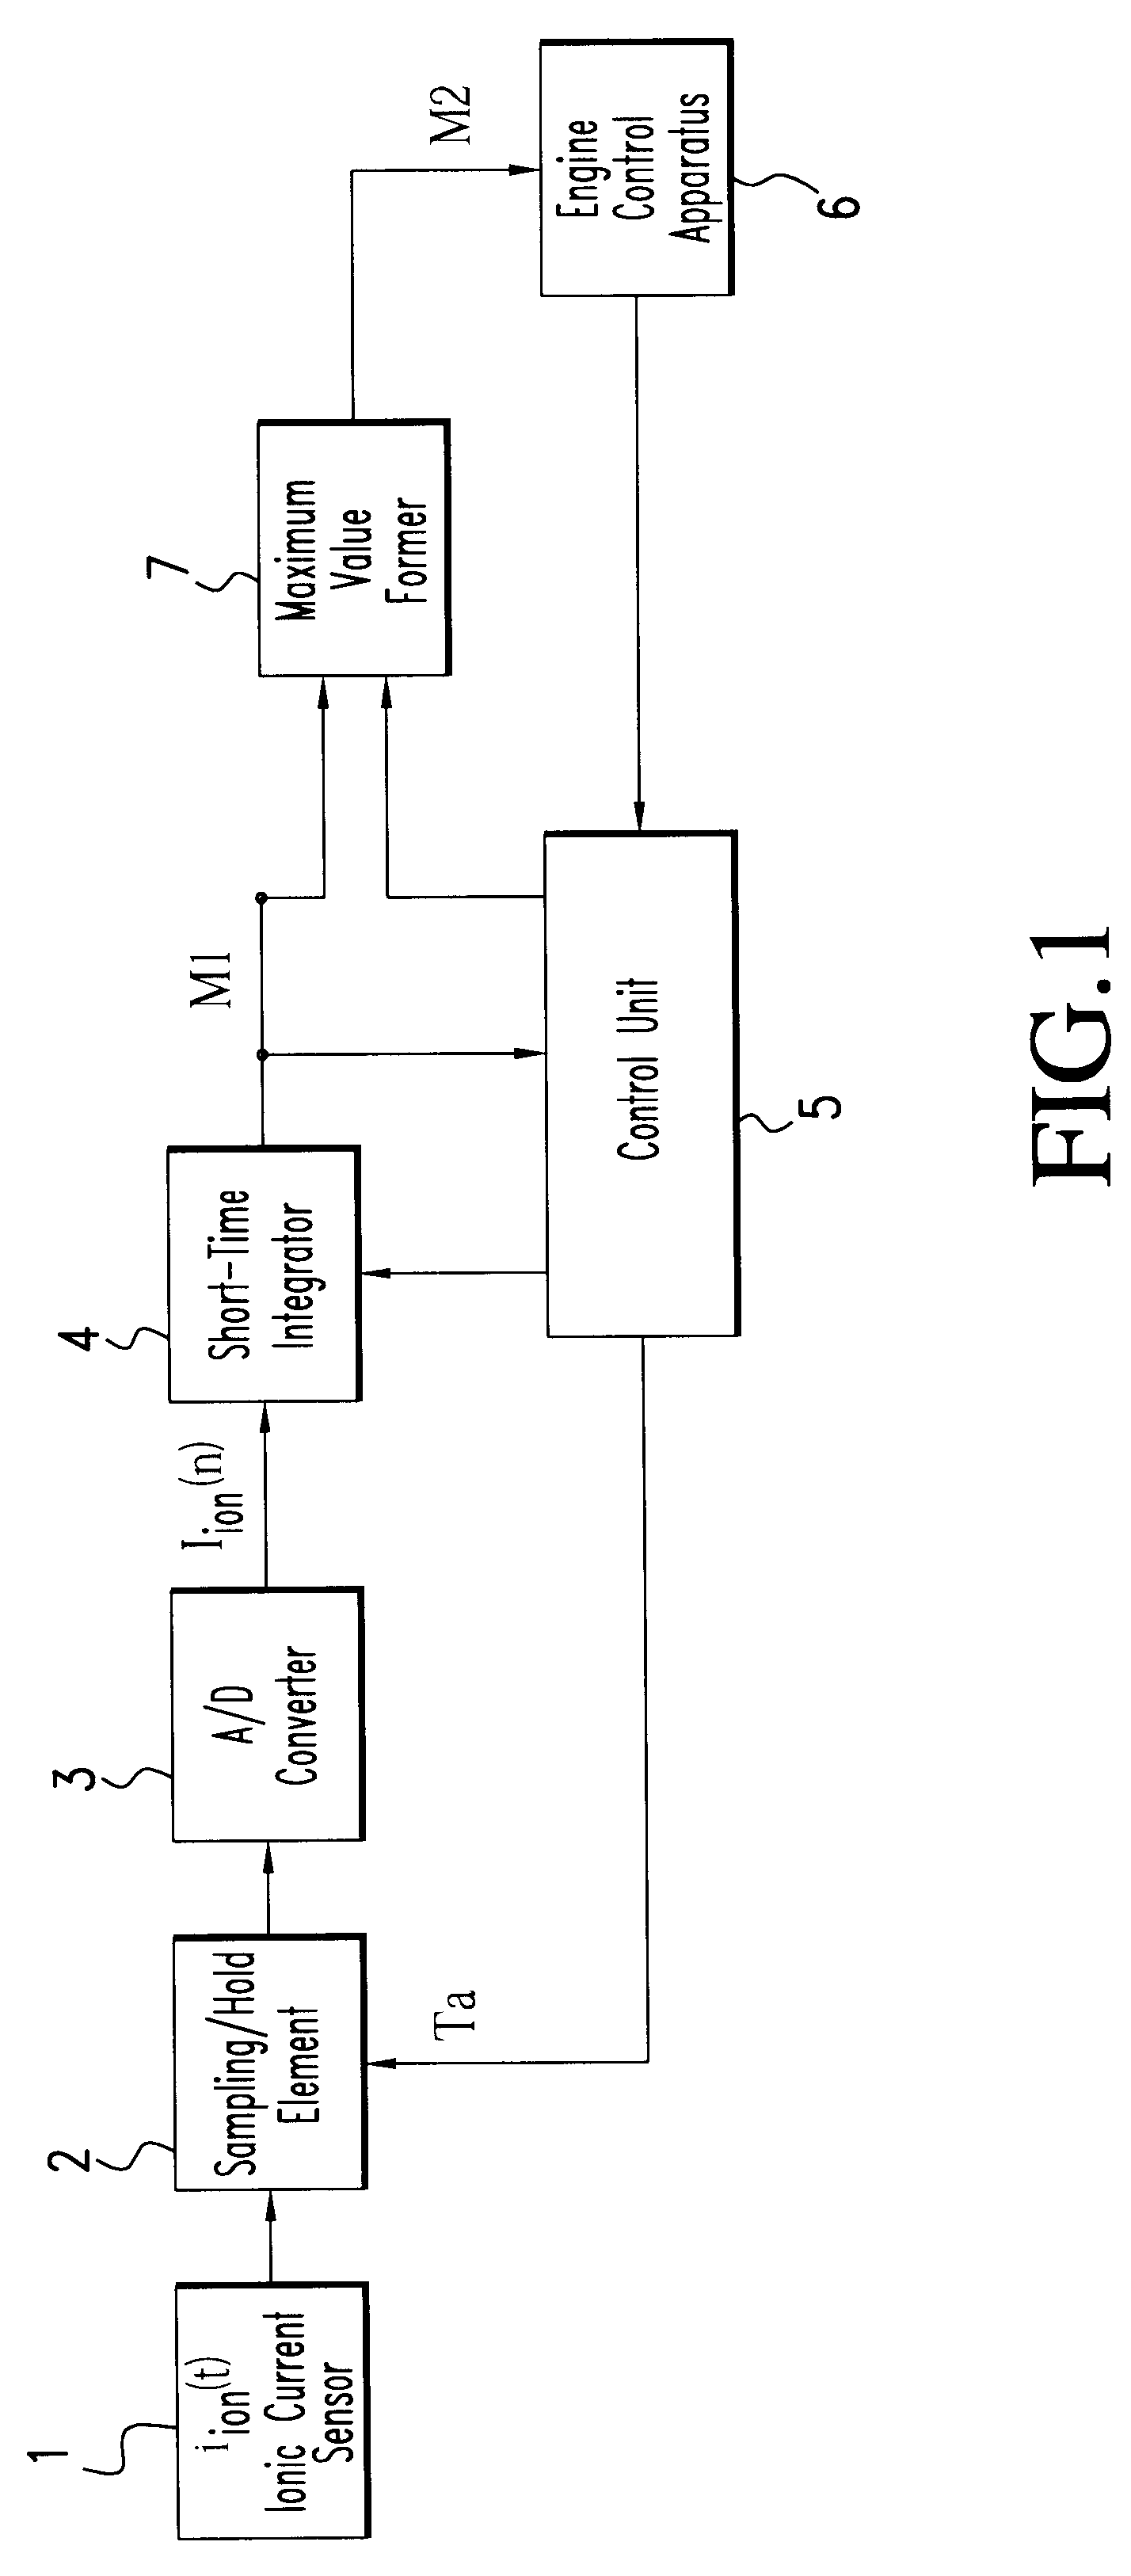 Method and device for evaluating ionic current signals for assessing combustion processes